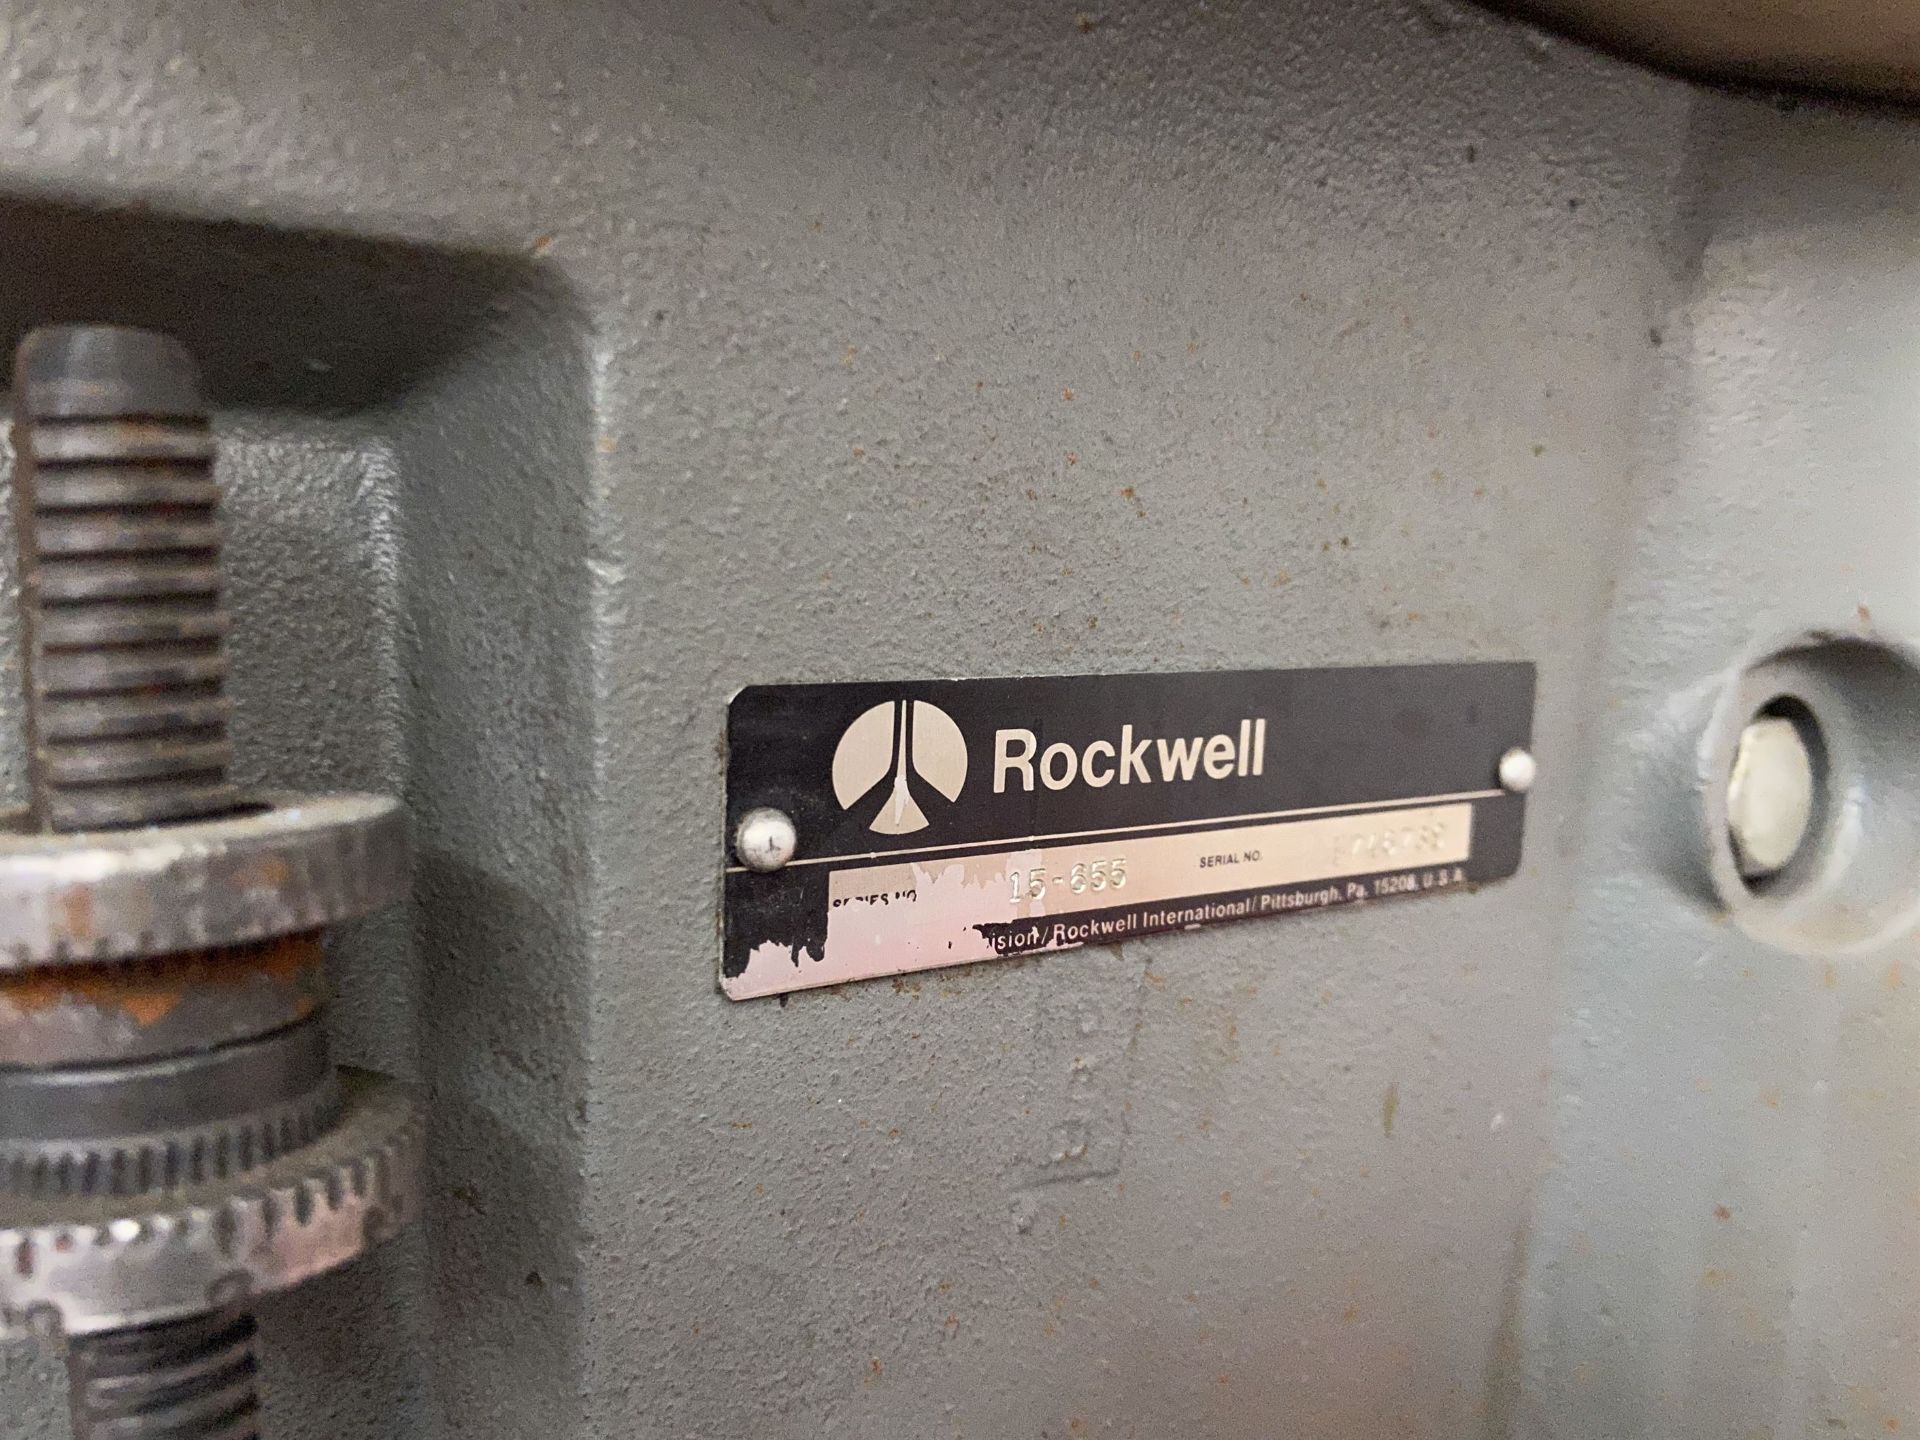 Rockwell No 15-655 Bench Type Pedestal Mount Drill Press - Image 3 of 3